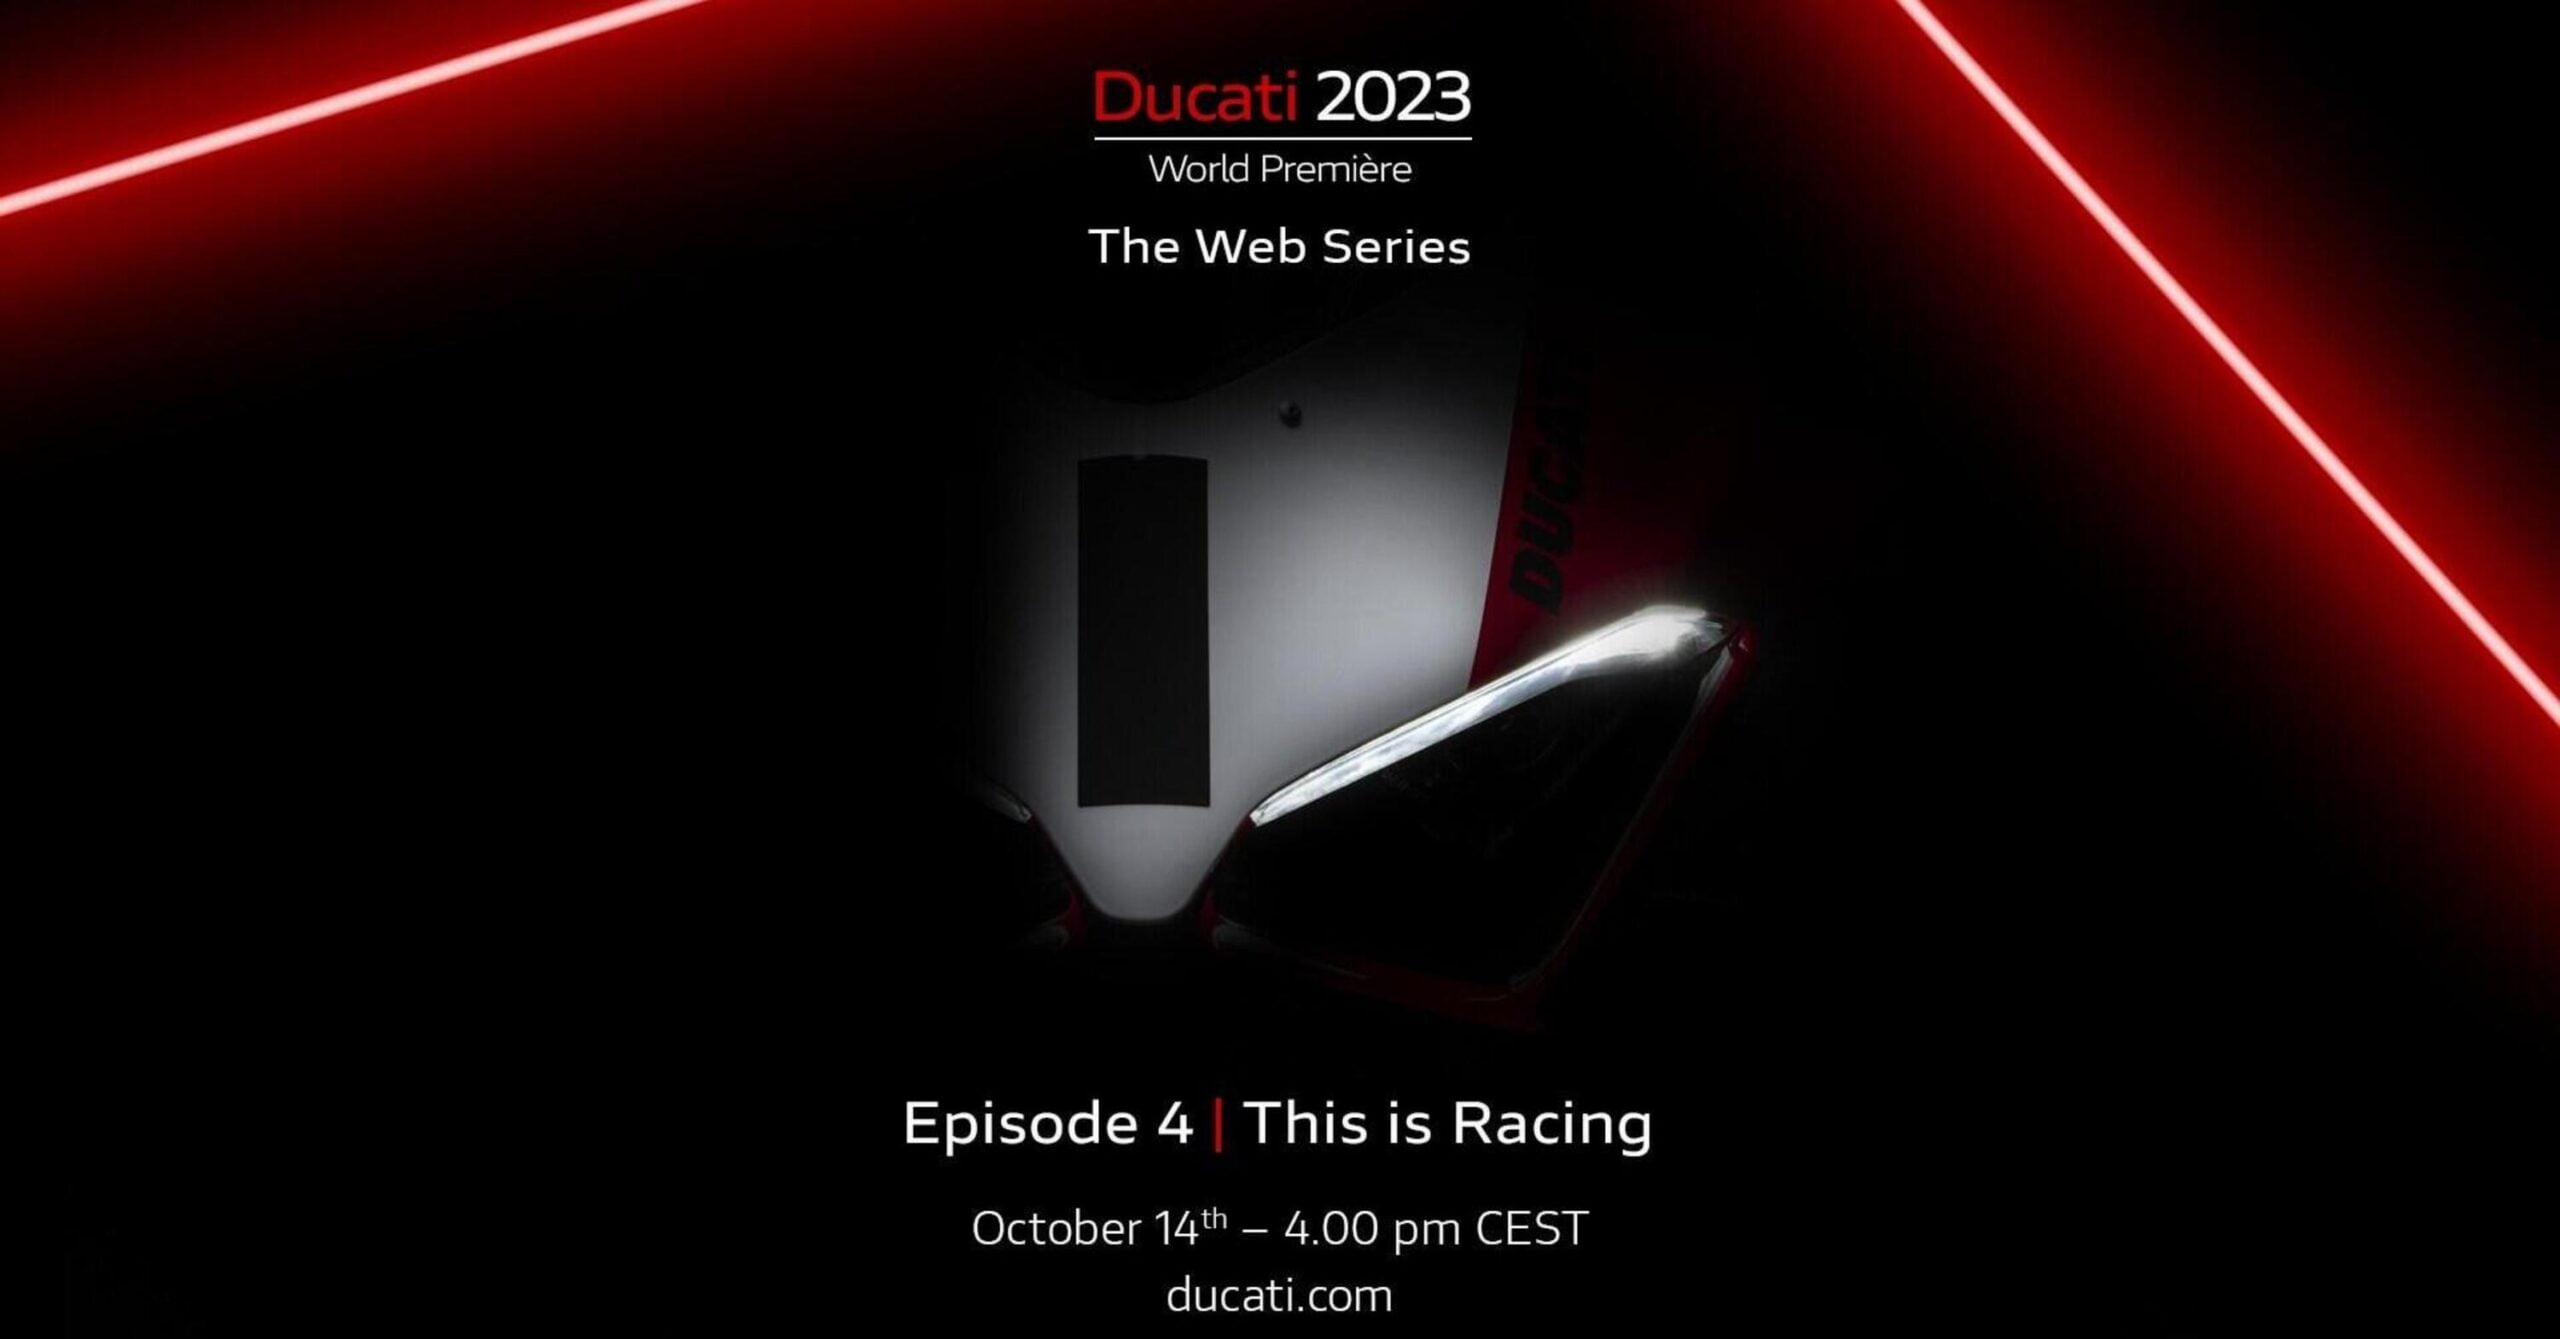 [Street] Ducati has rescheduled episode 4 of its World Premiere, and today we discover some sports news!